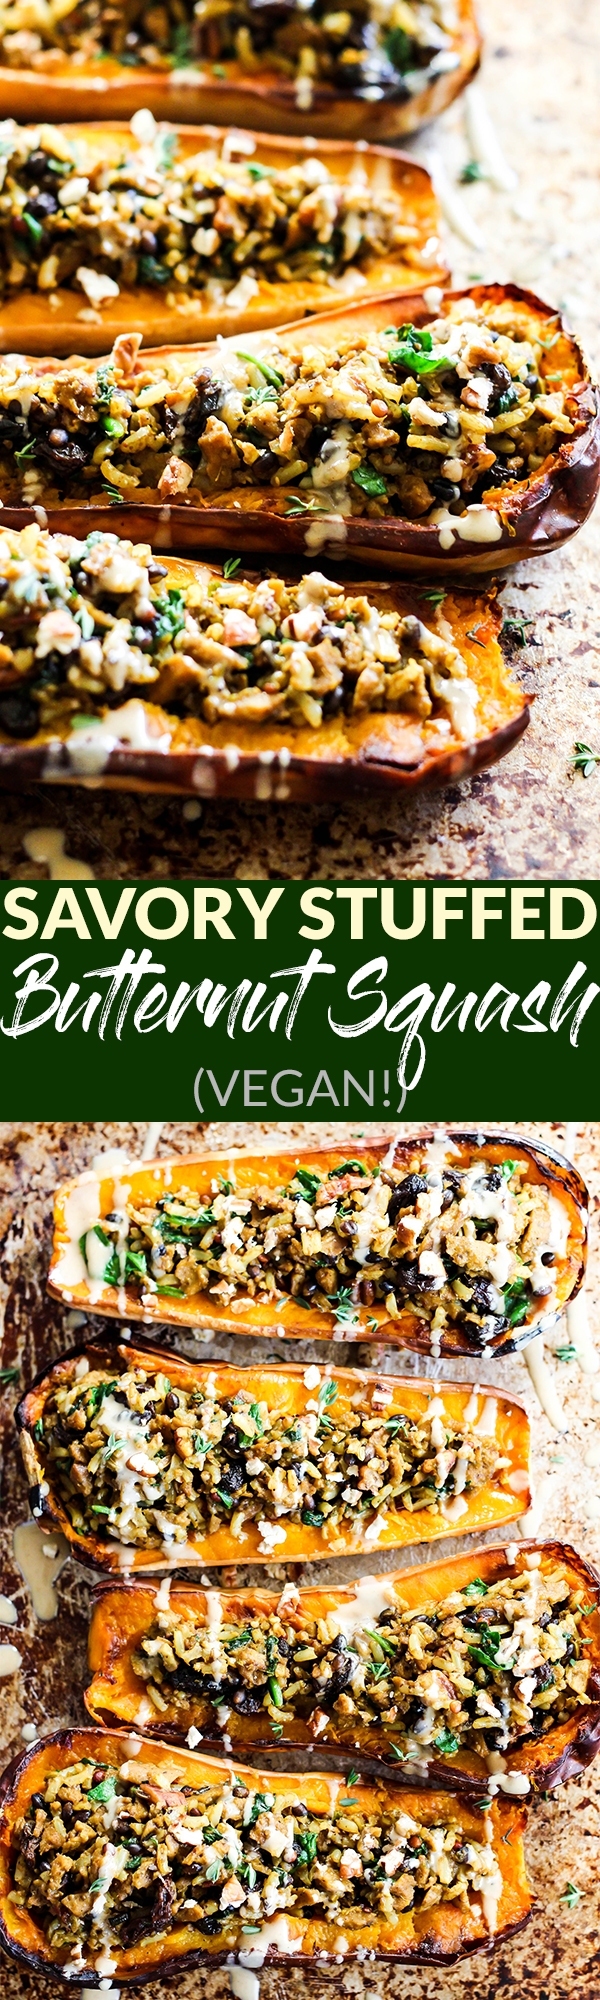 Take advantage of fresh squash with this easy Savory Vegan Stuffed Butternut Squash recipe! It's savory with a hint of sweet & perfect for the holidays.